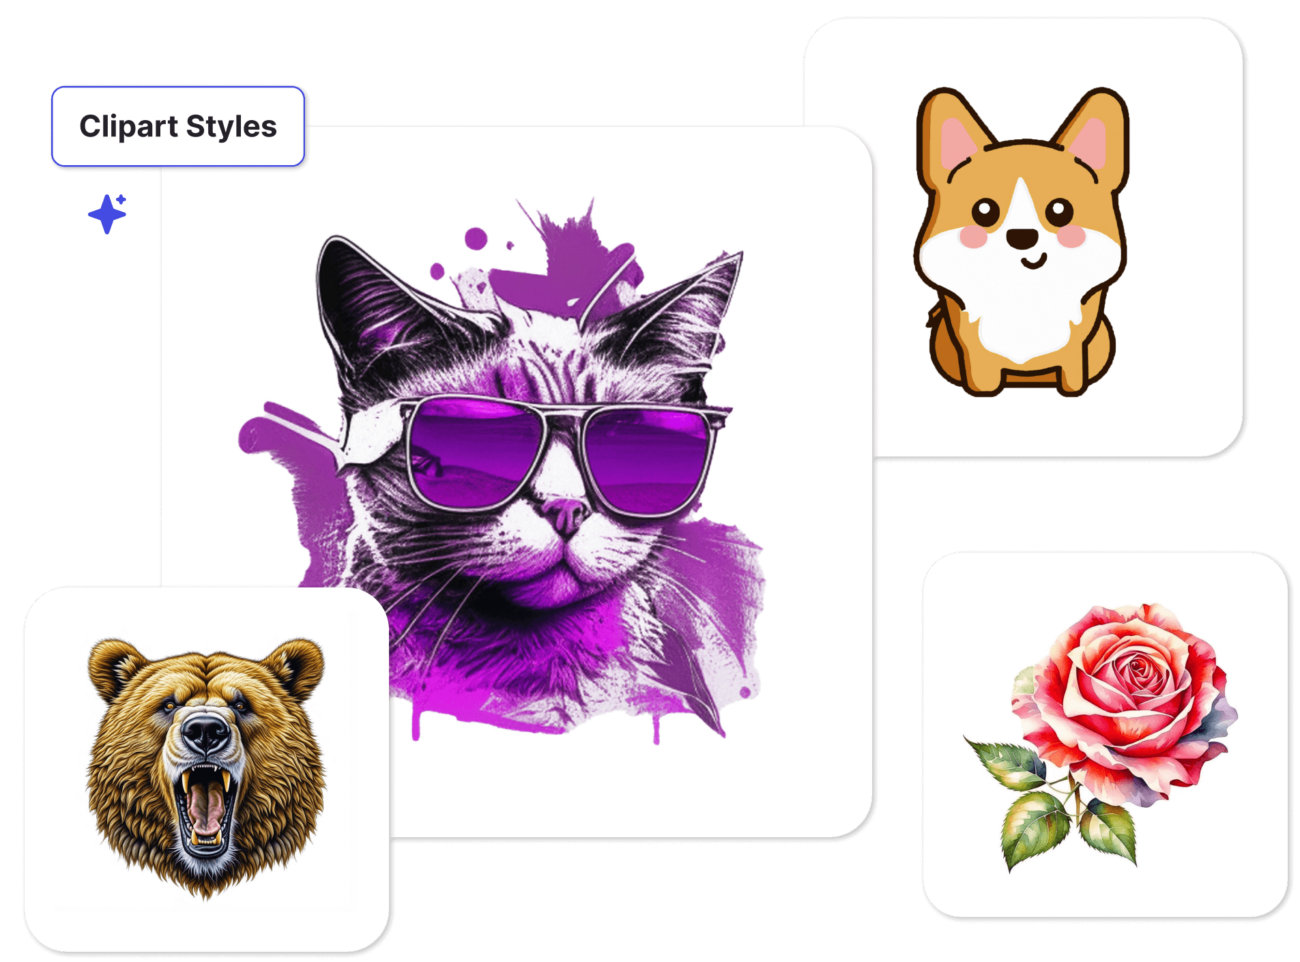 Collection of various clipart styles featuring a cool purple cat with sunglasses, a cute cartoon corgi, a detailed illustration of a roaring bear, and a realistic pink rose.